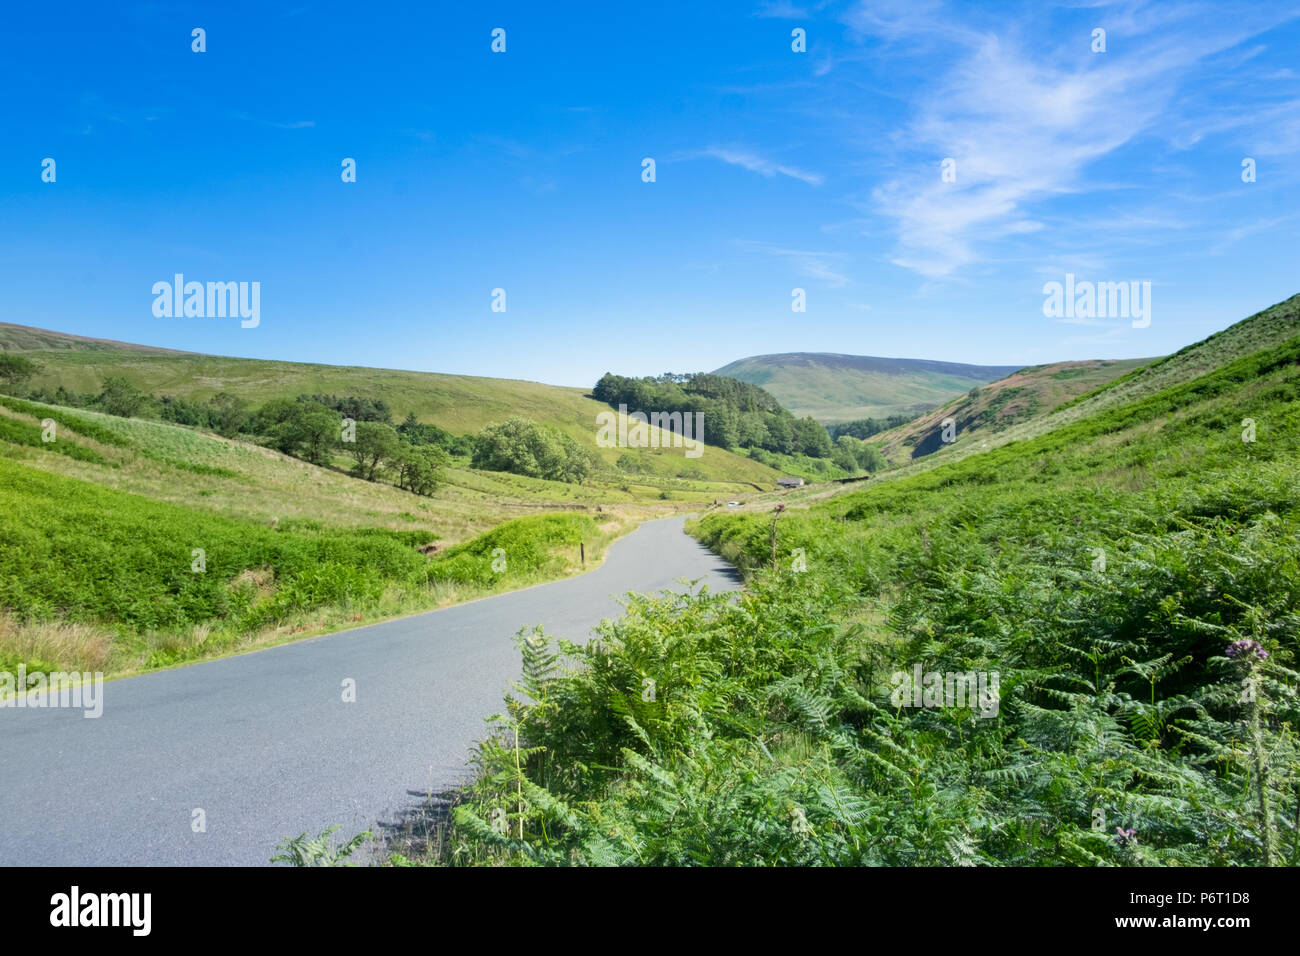 Trough of Bowland, Lancashire, a wild moorland road which links Clitheroe with Lancaster. Stock Photo